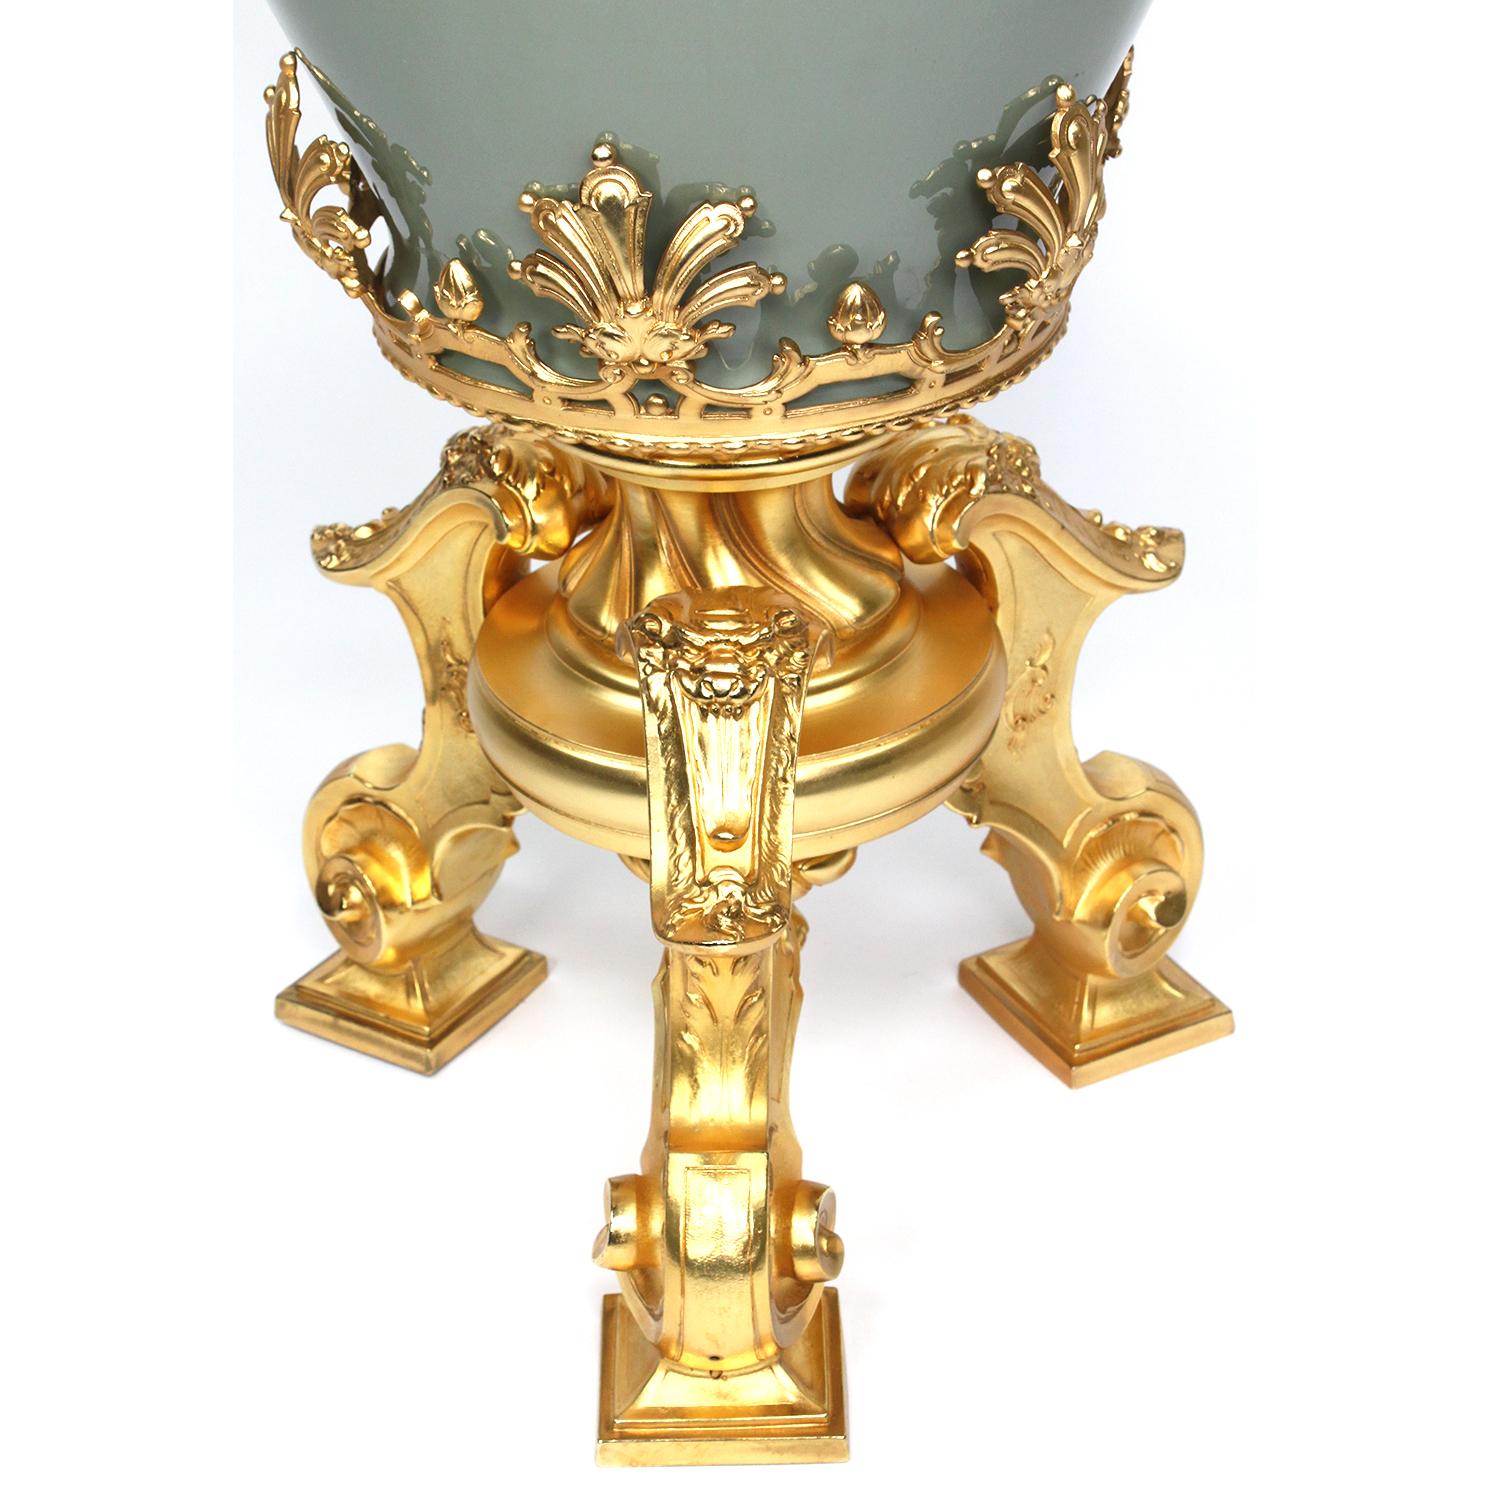 Continental 19th-20th Century Porcelain and Gilt Metal Mounted Vase with Cherubs 5